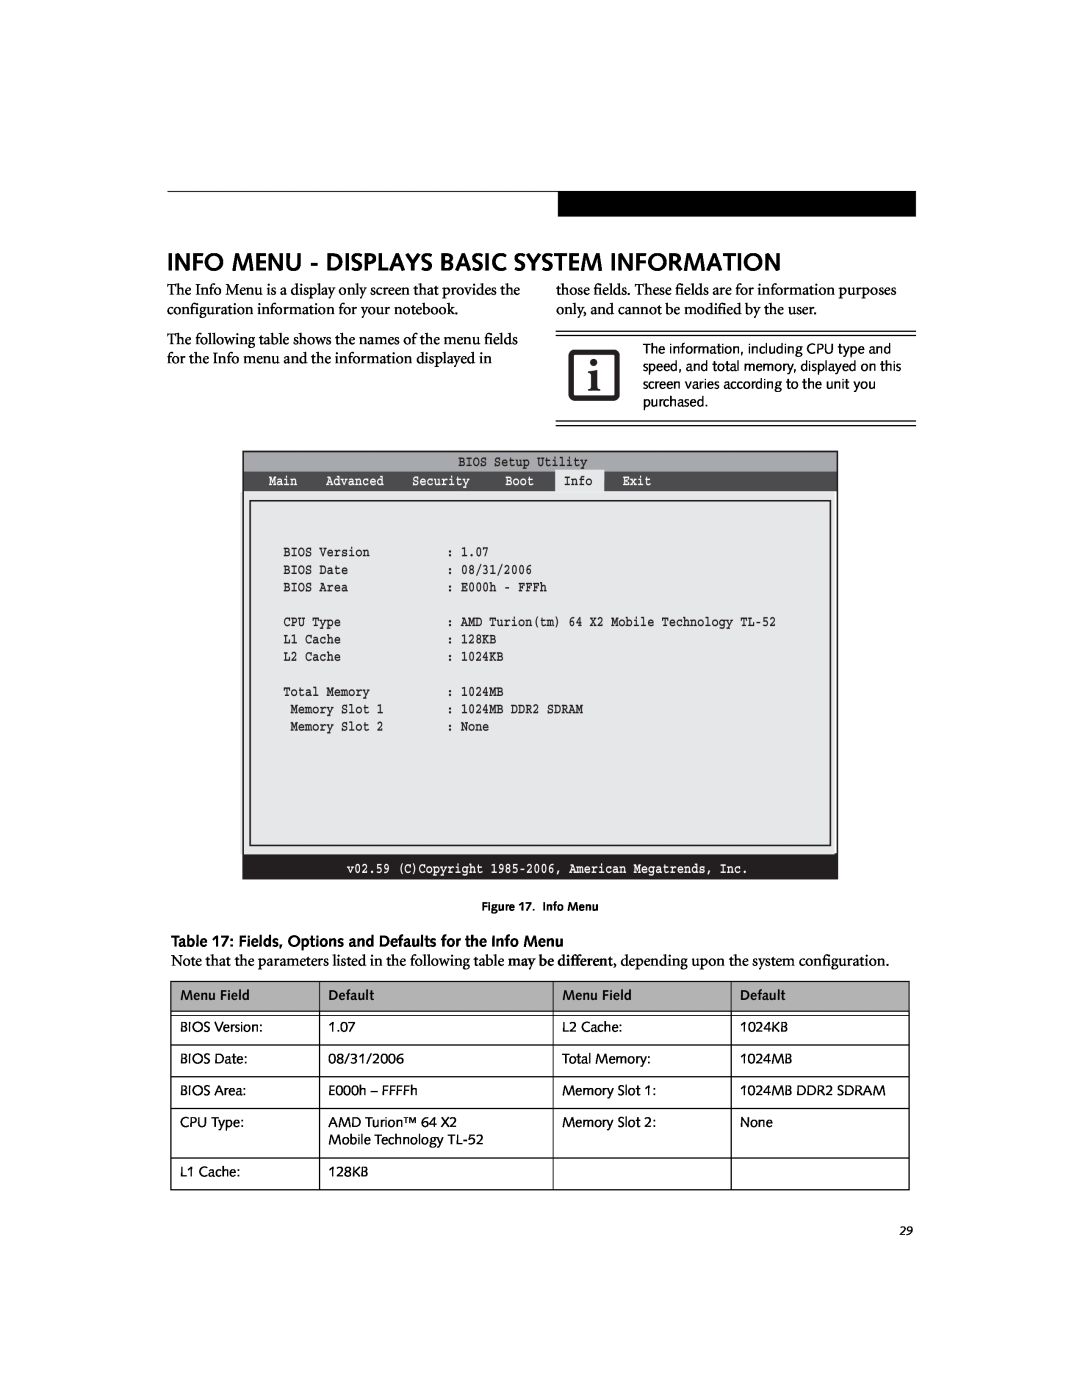 Fujitsu A3110 manual Info Menu - Displays Basic System Information, Fields, Options and Defaults for the Info Menu 